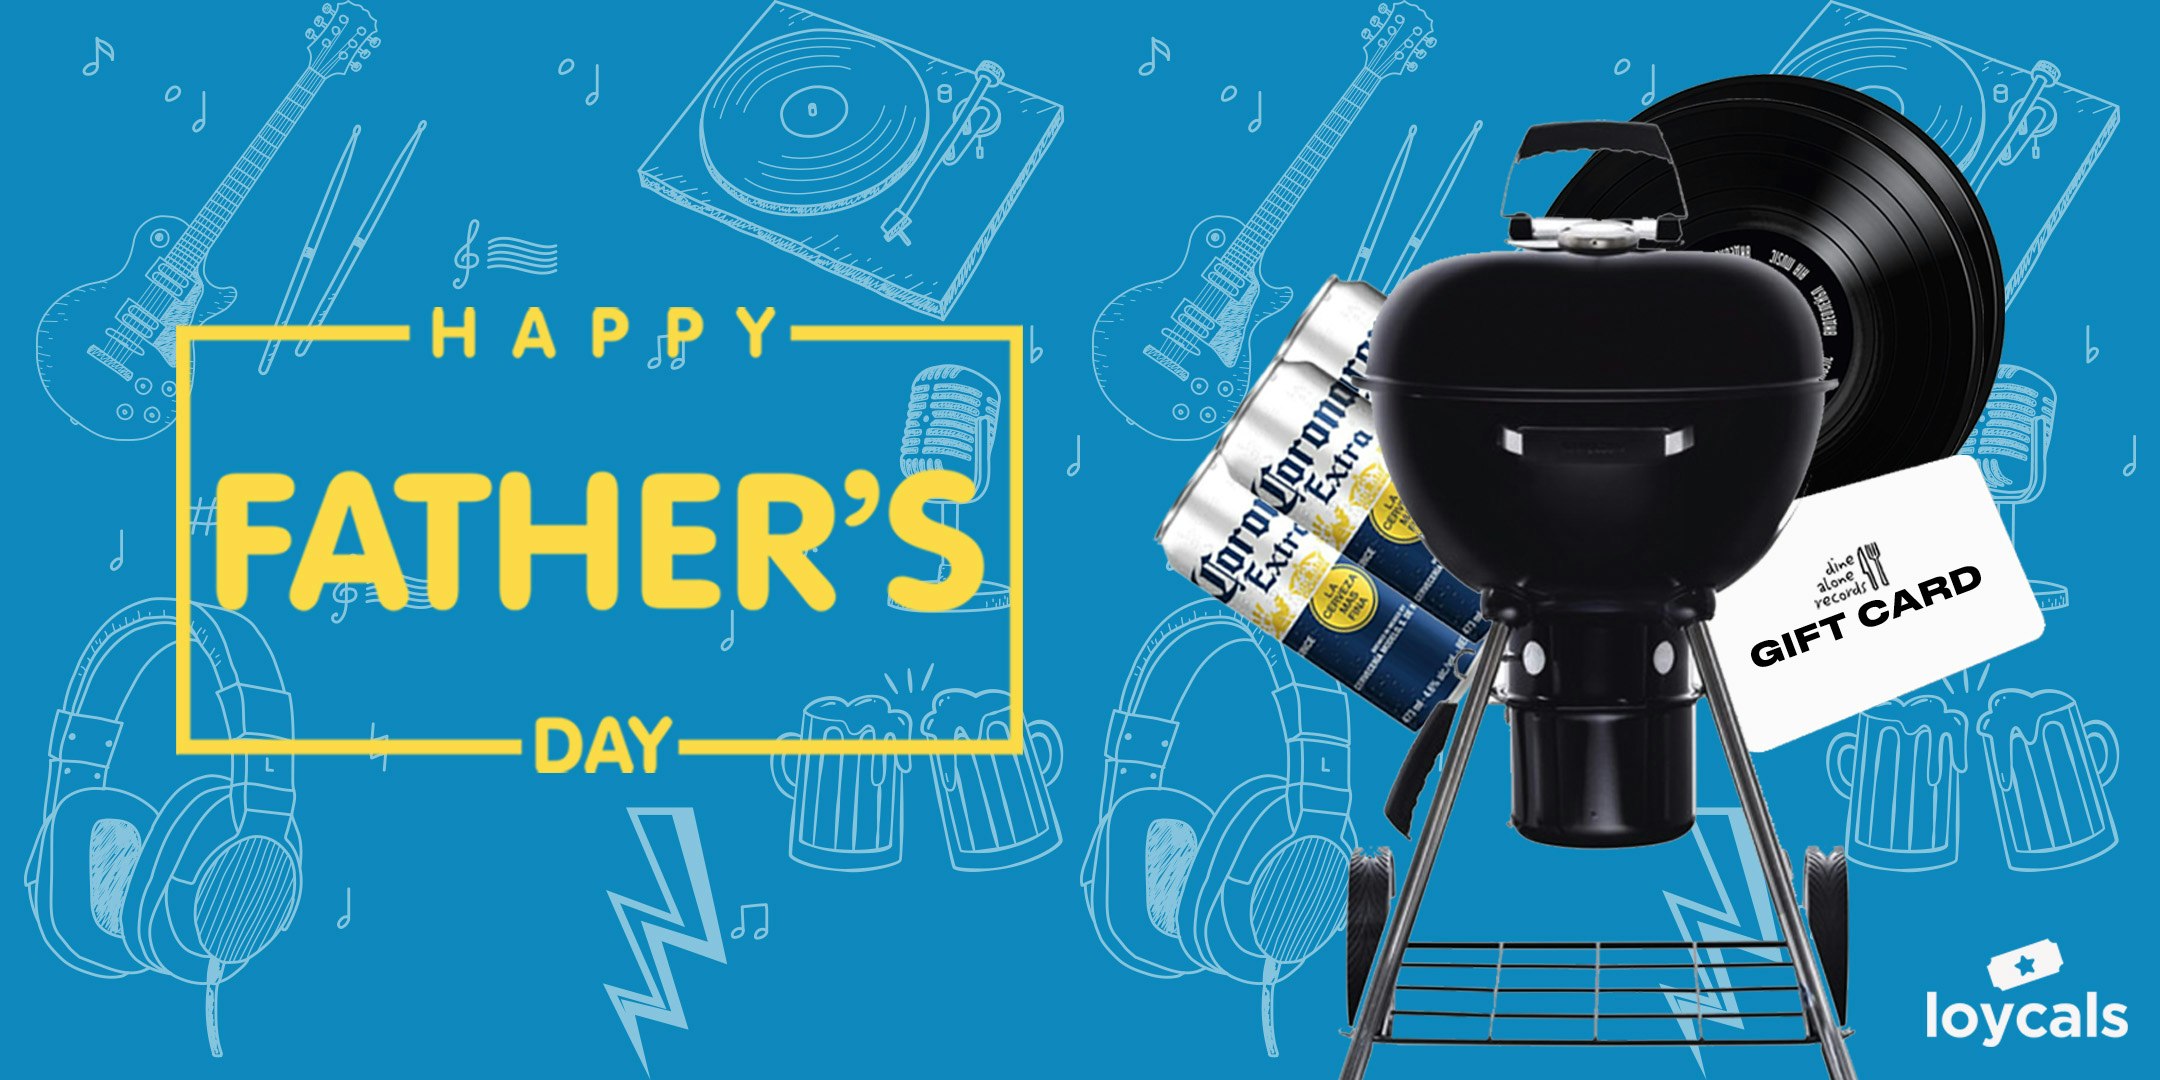 online contests, sweepstakes and giveaways - Win the ultimate Father's Day Giveaway!